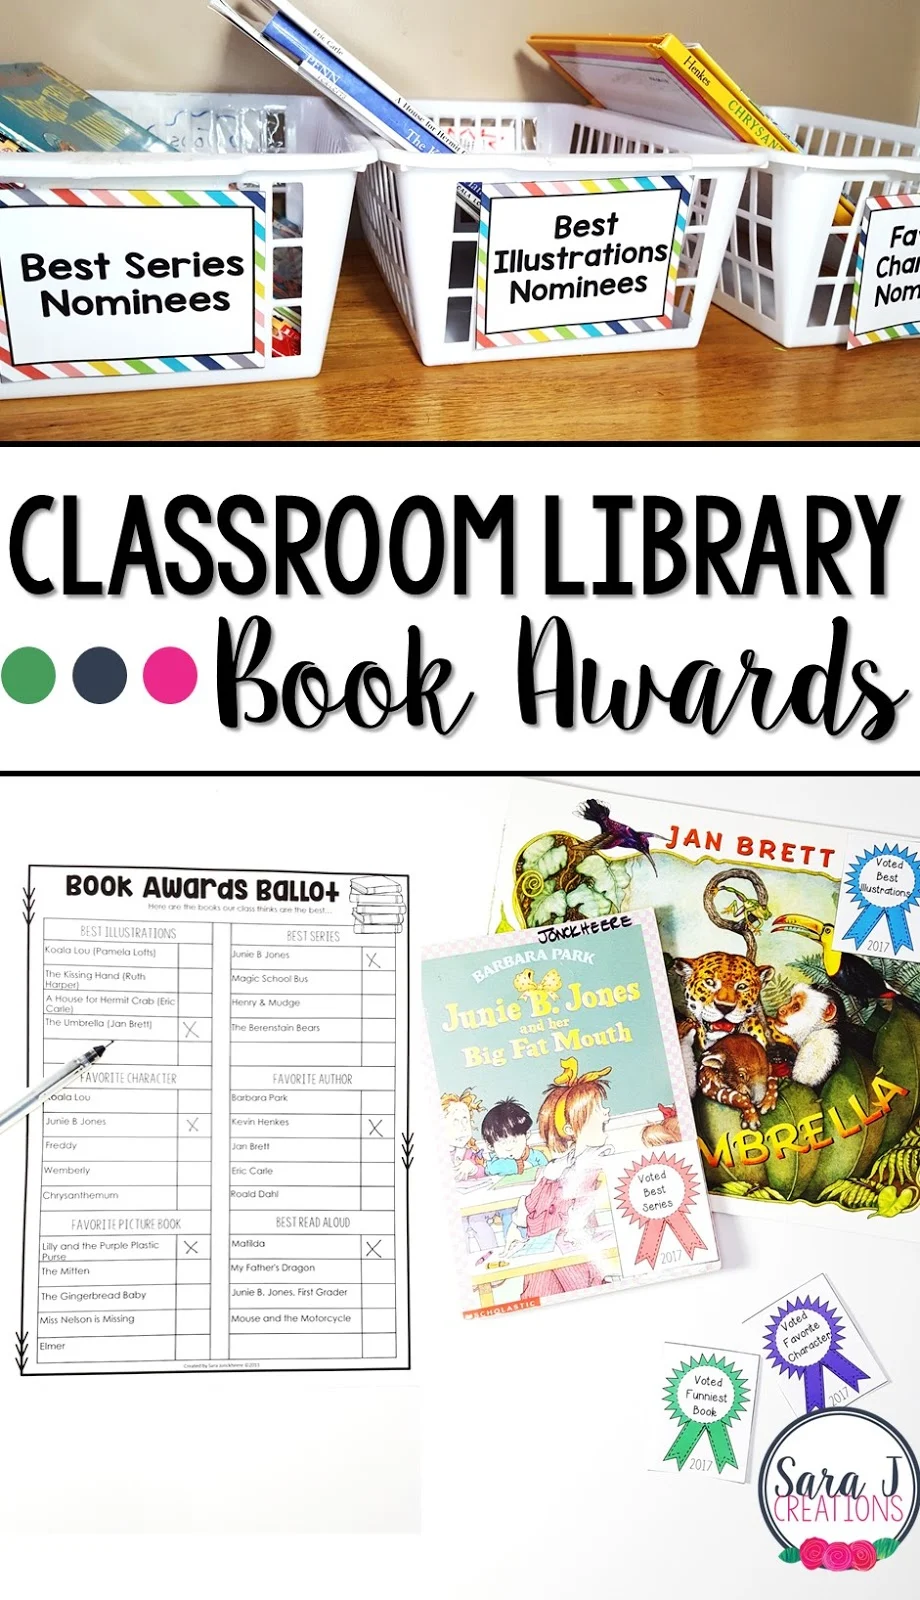 Great activity for March is Reading Month!  Classroom library book awards.